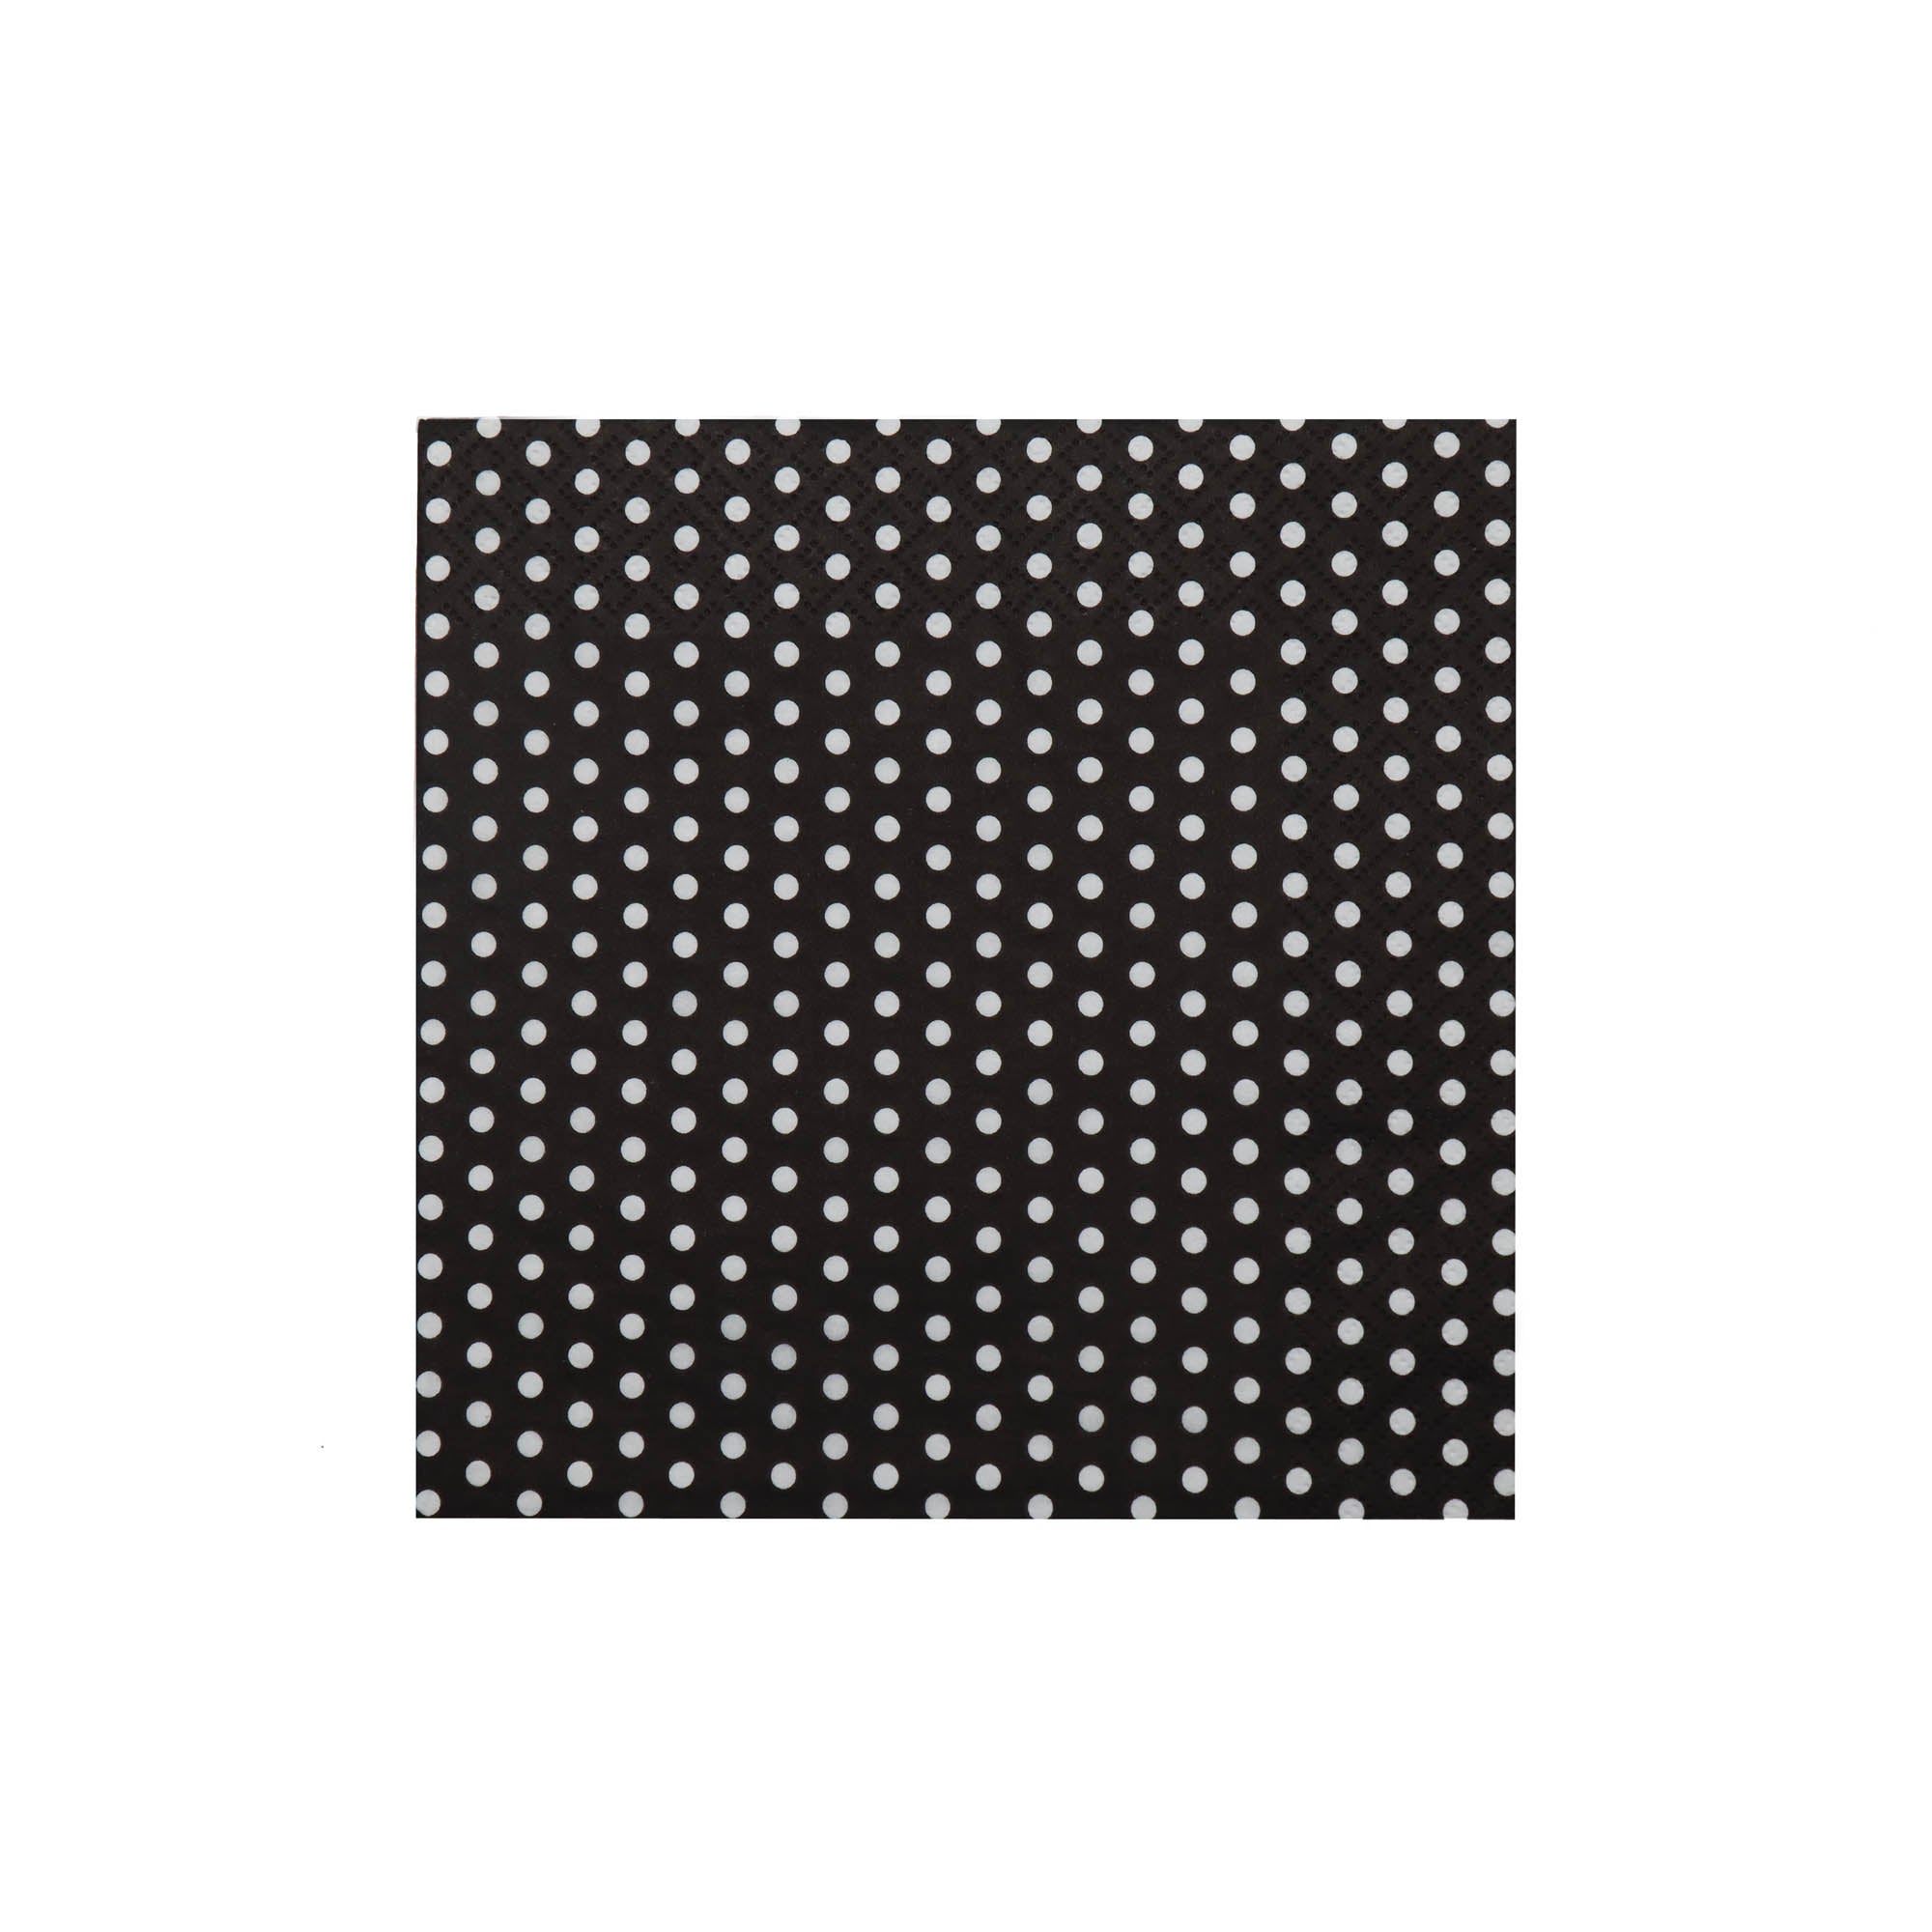 Luncheon Table Paper Serviettes 3ply 33x33cm Black Polka Dots  20pack